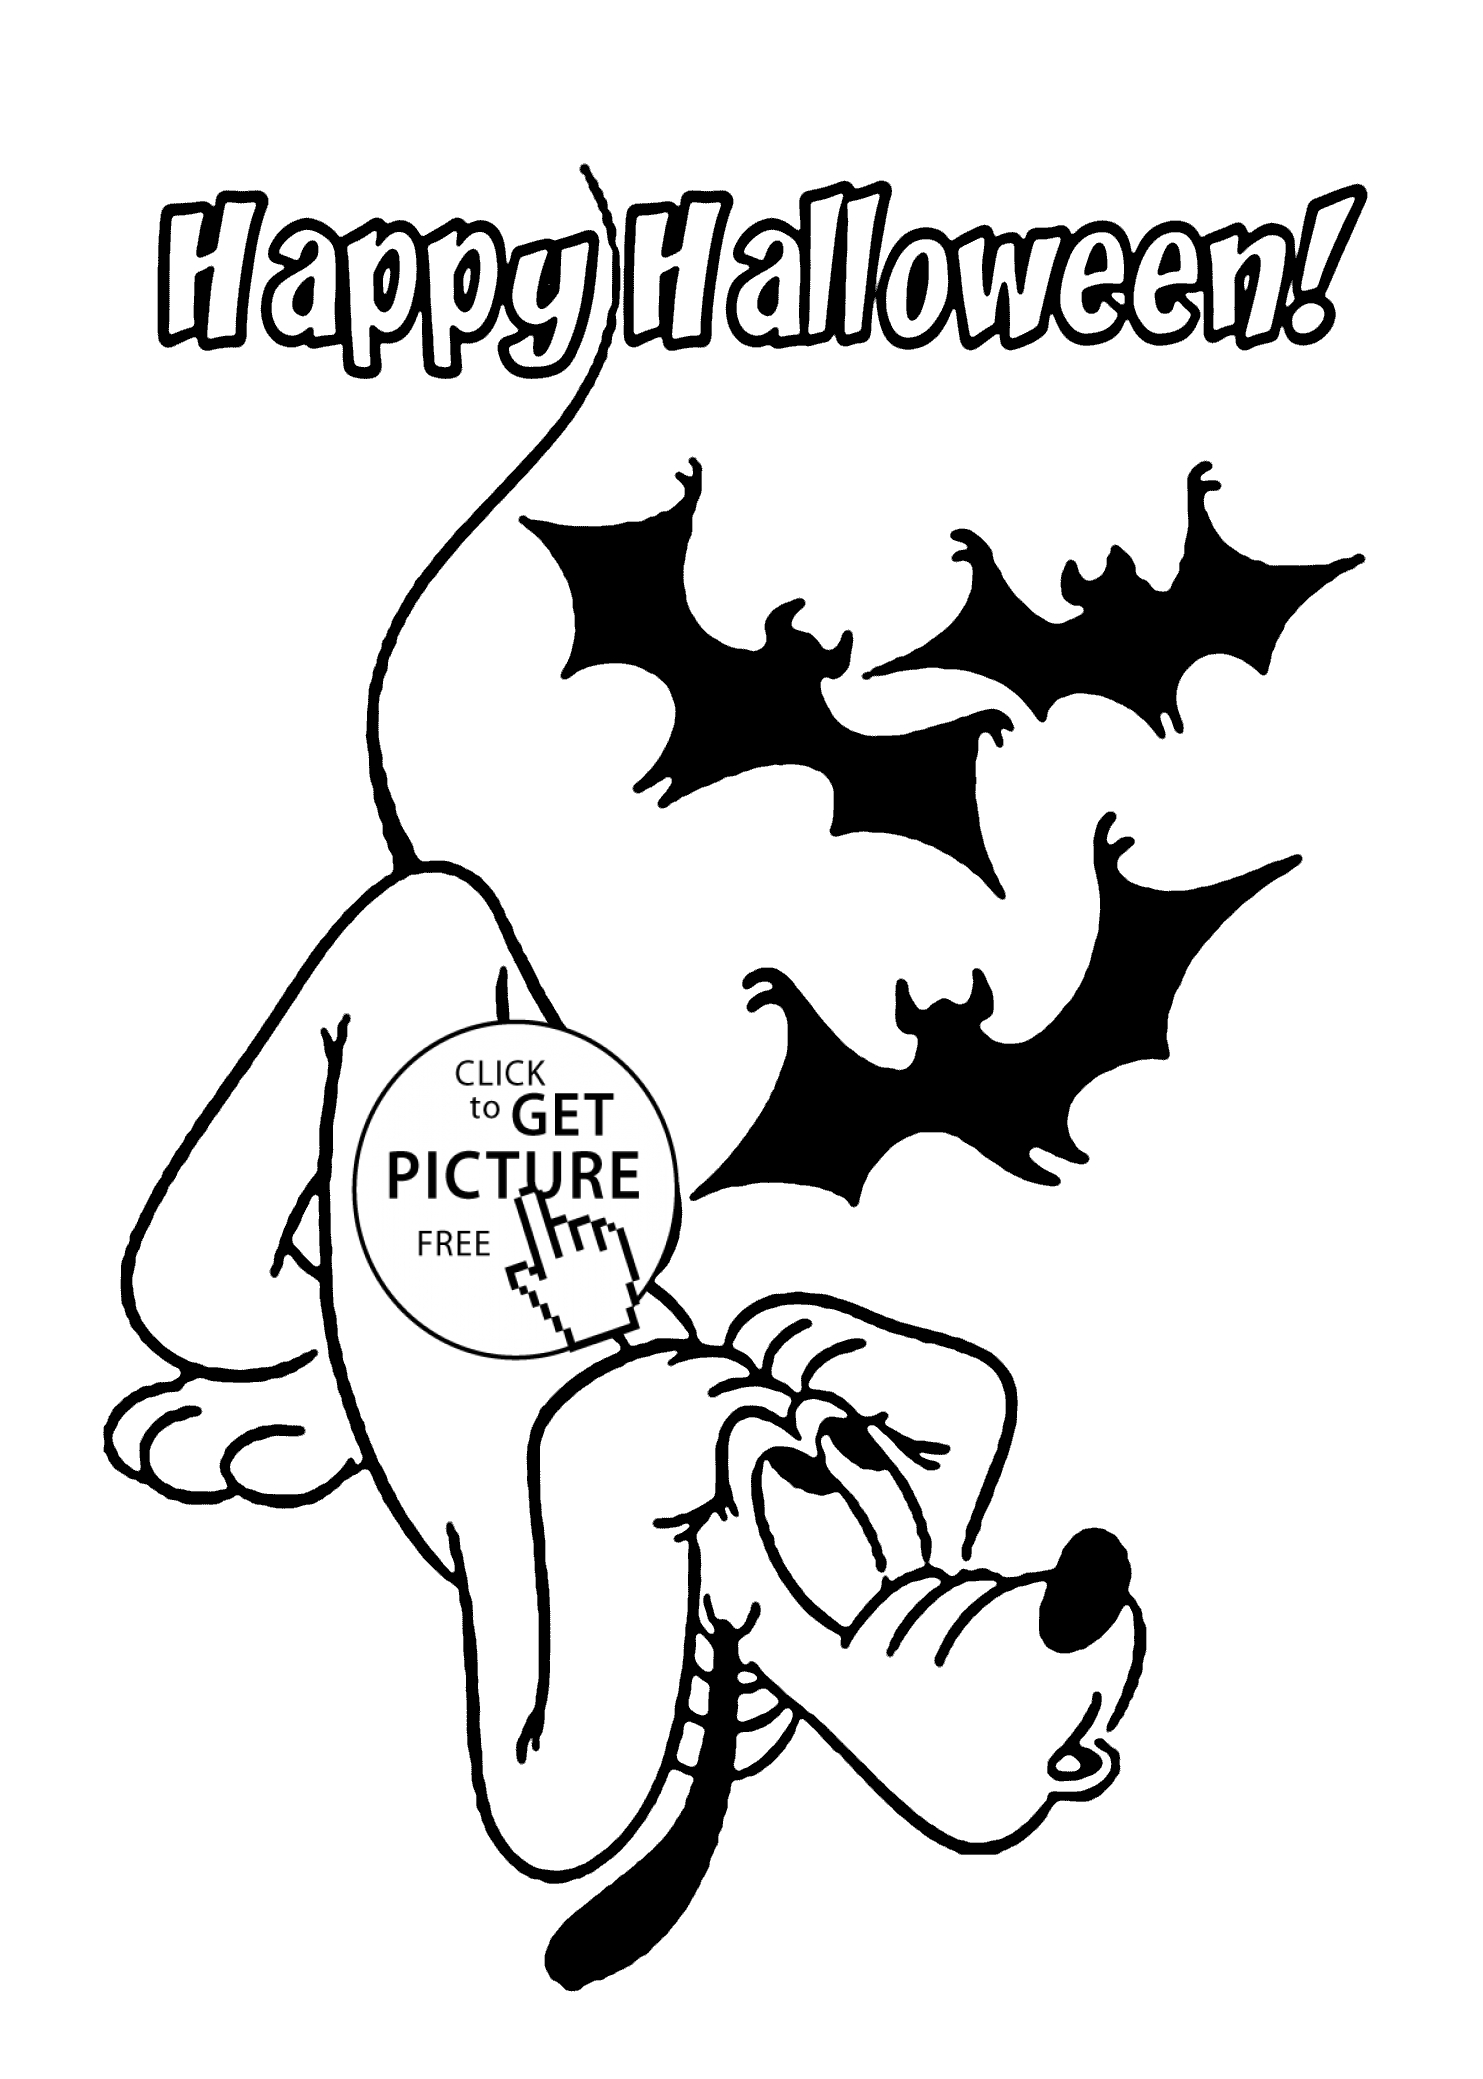 Pluto Coloring Pages Happy Halloween And Pluto Coloring Page For Kids Printable Free